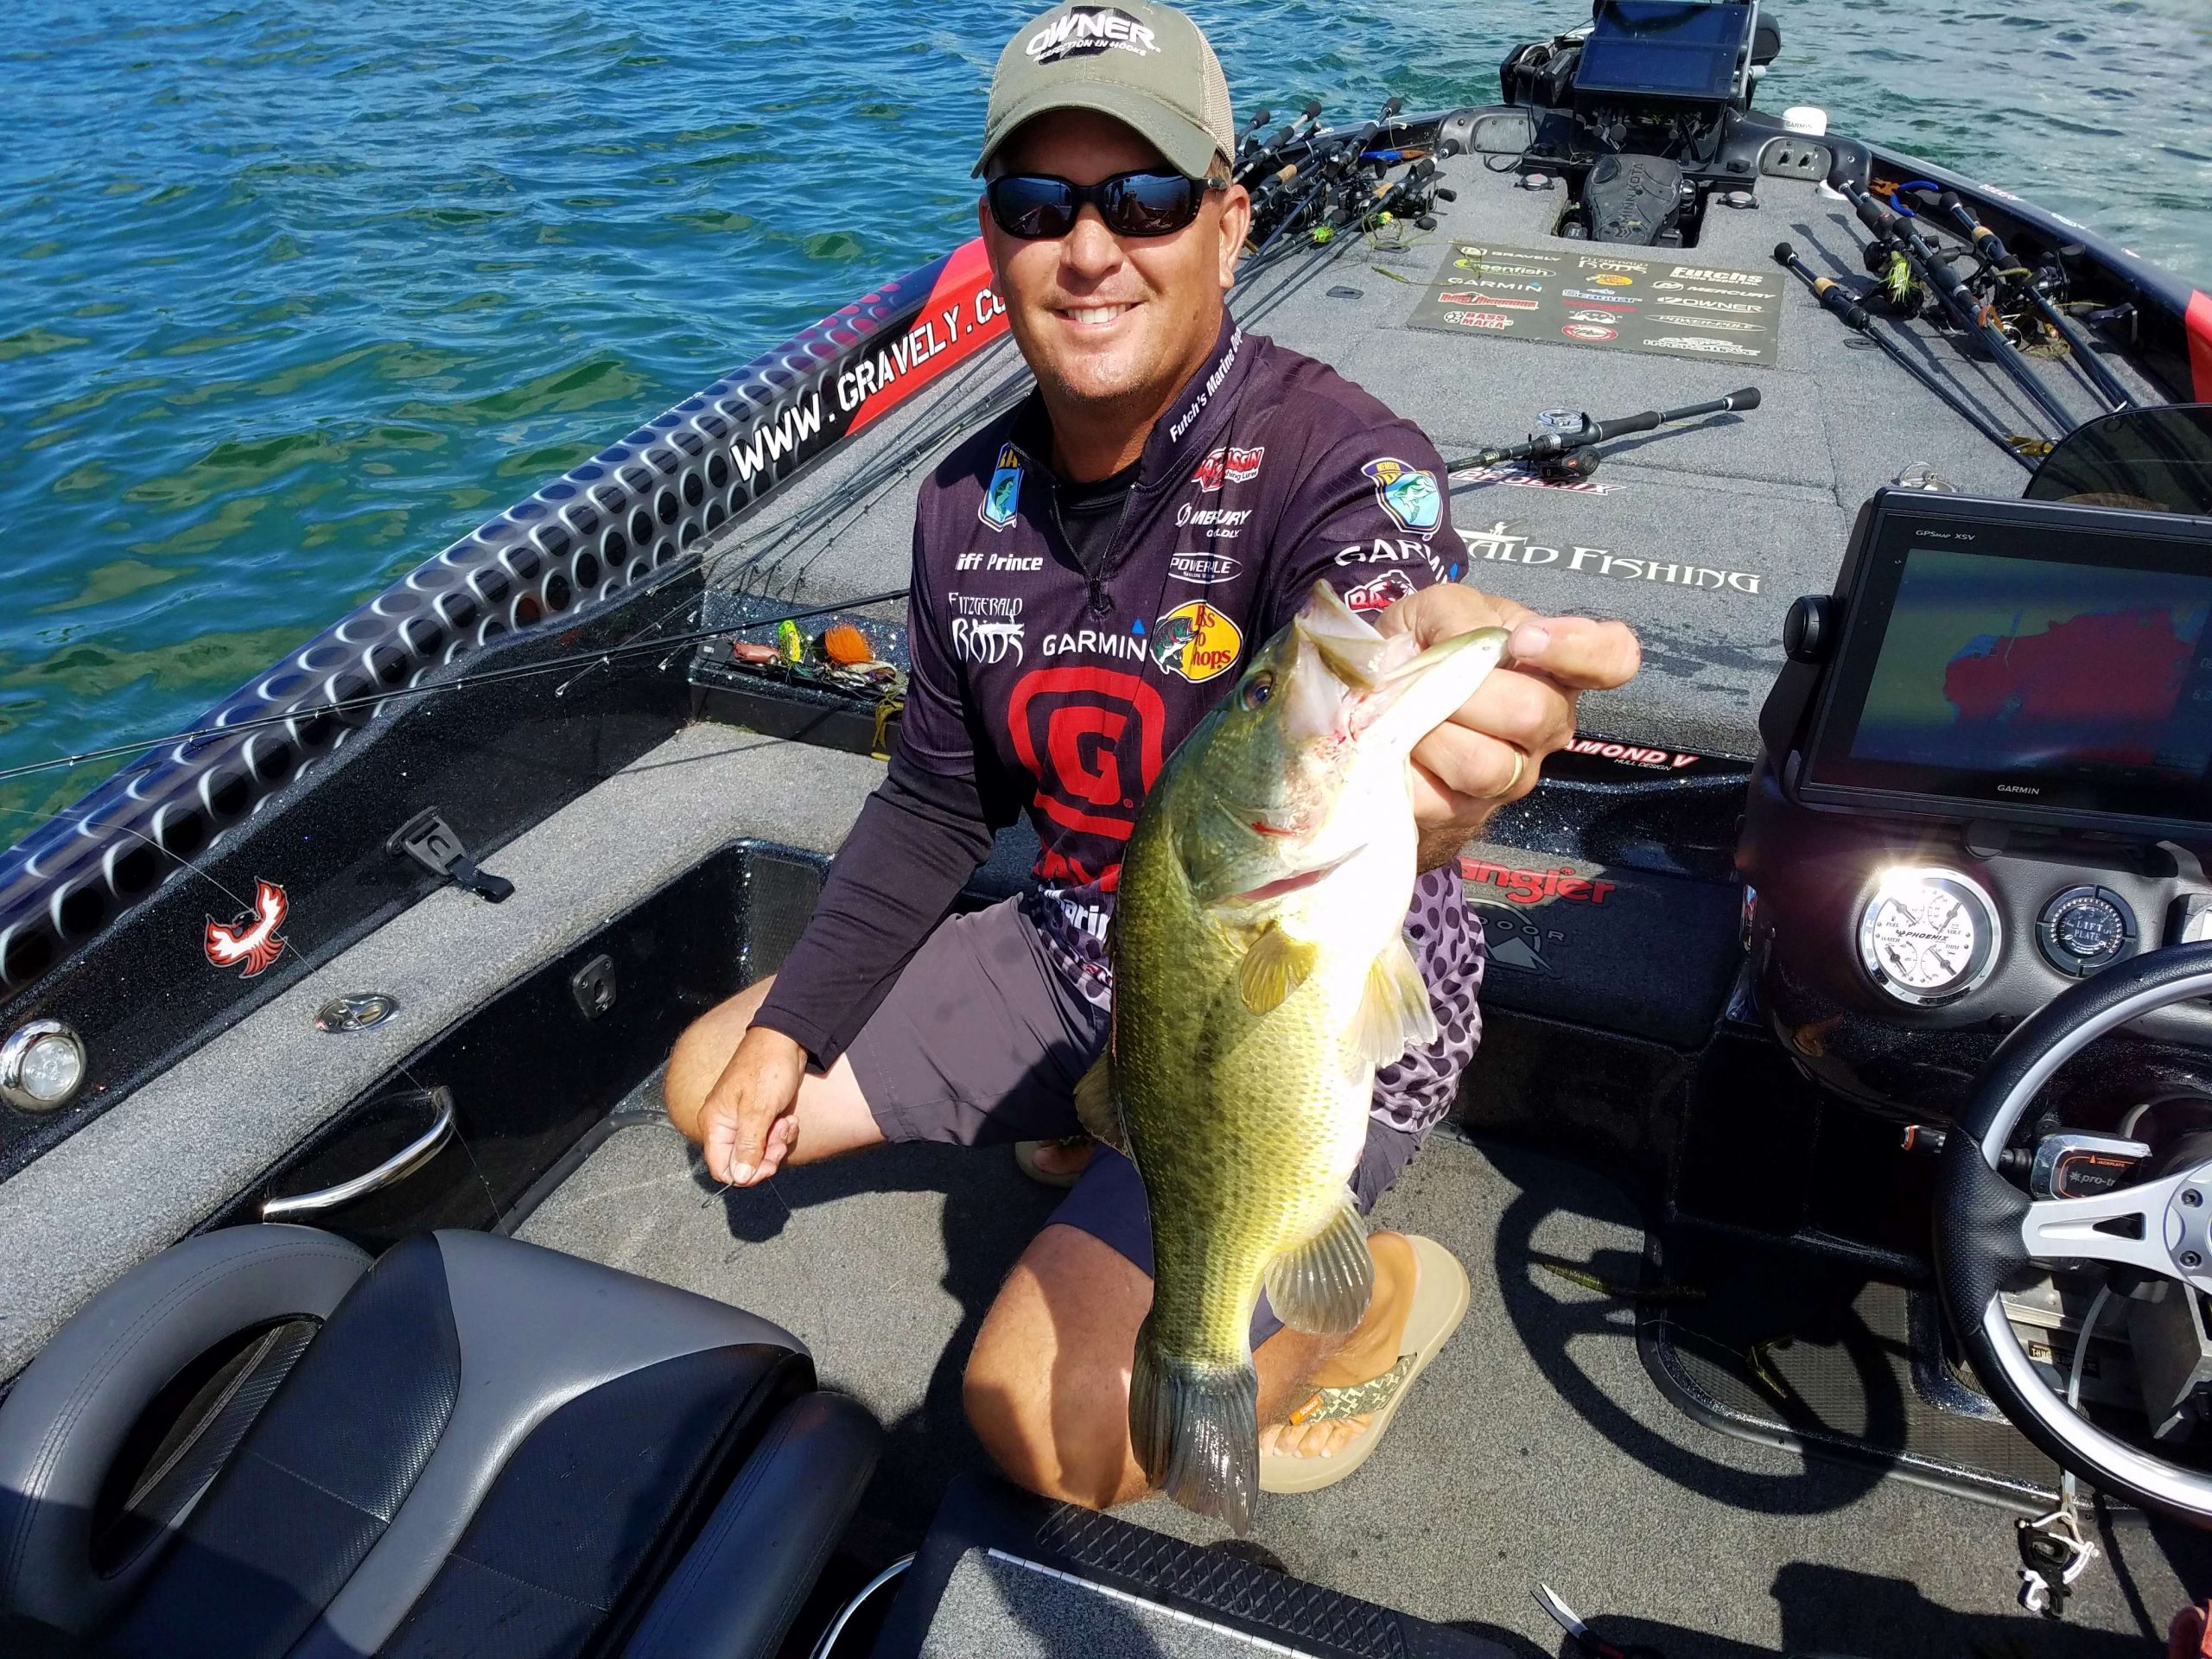 Cliff Pace landed this much needed 3-pounder and culled out a 1.5-pounder.